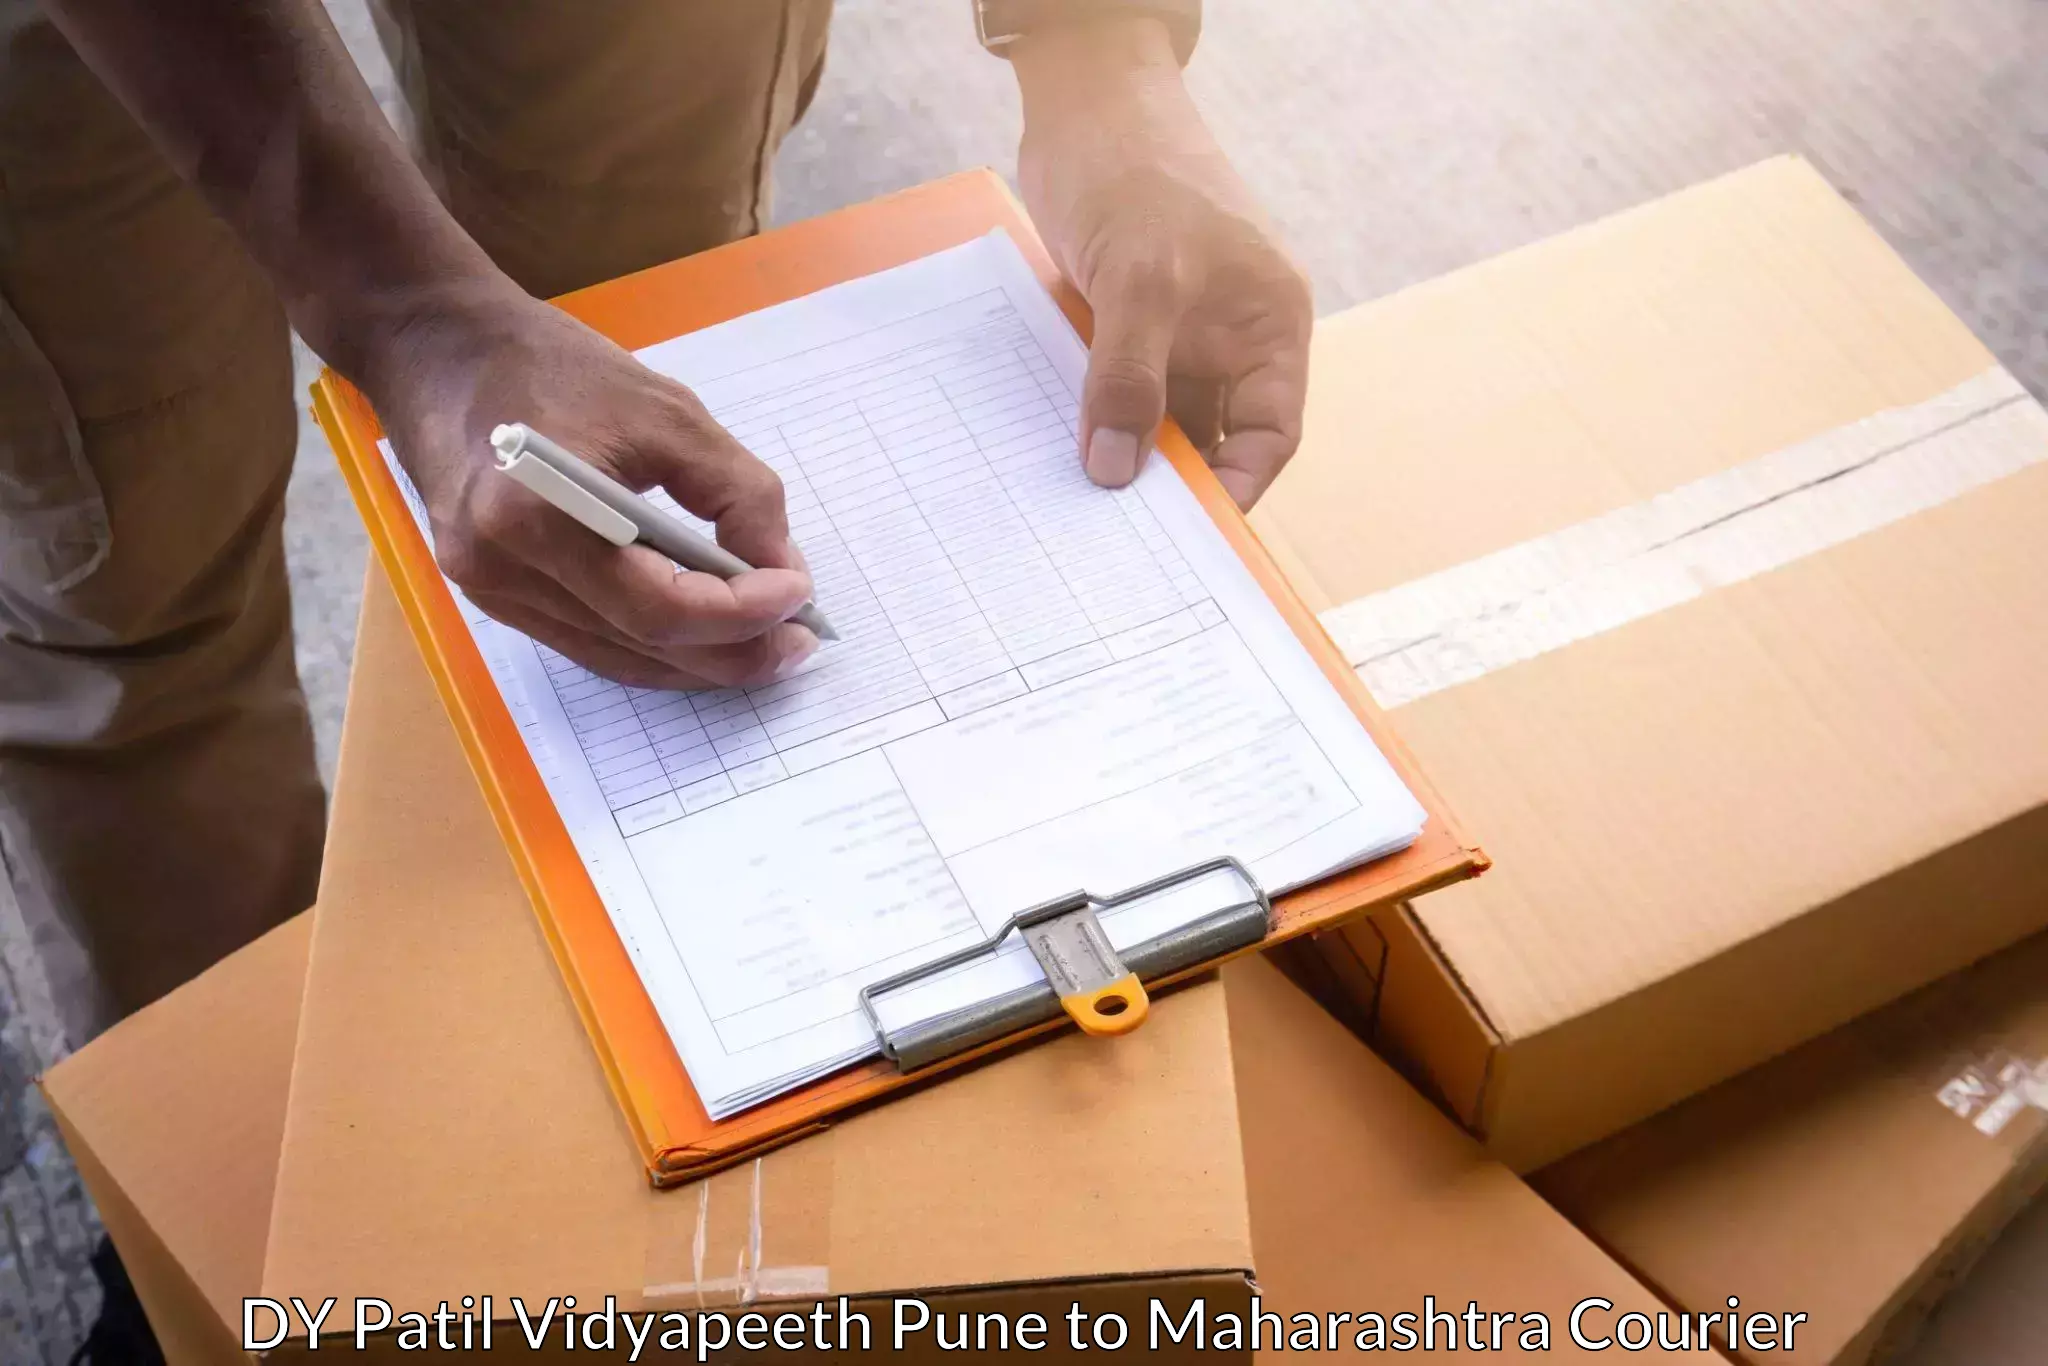 Courier service partnerships DY Patil Vidyapeeth Pune to Warud